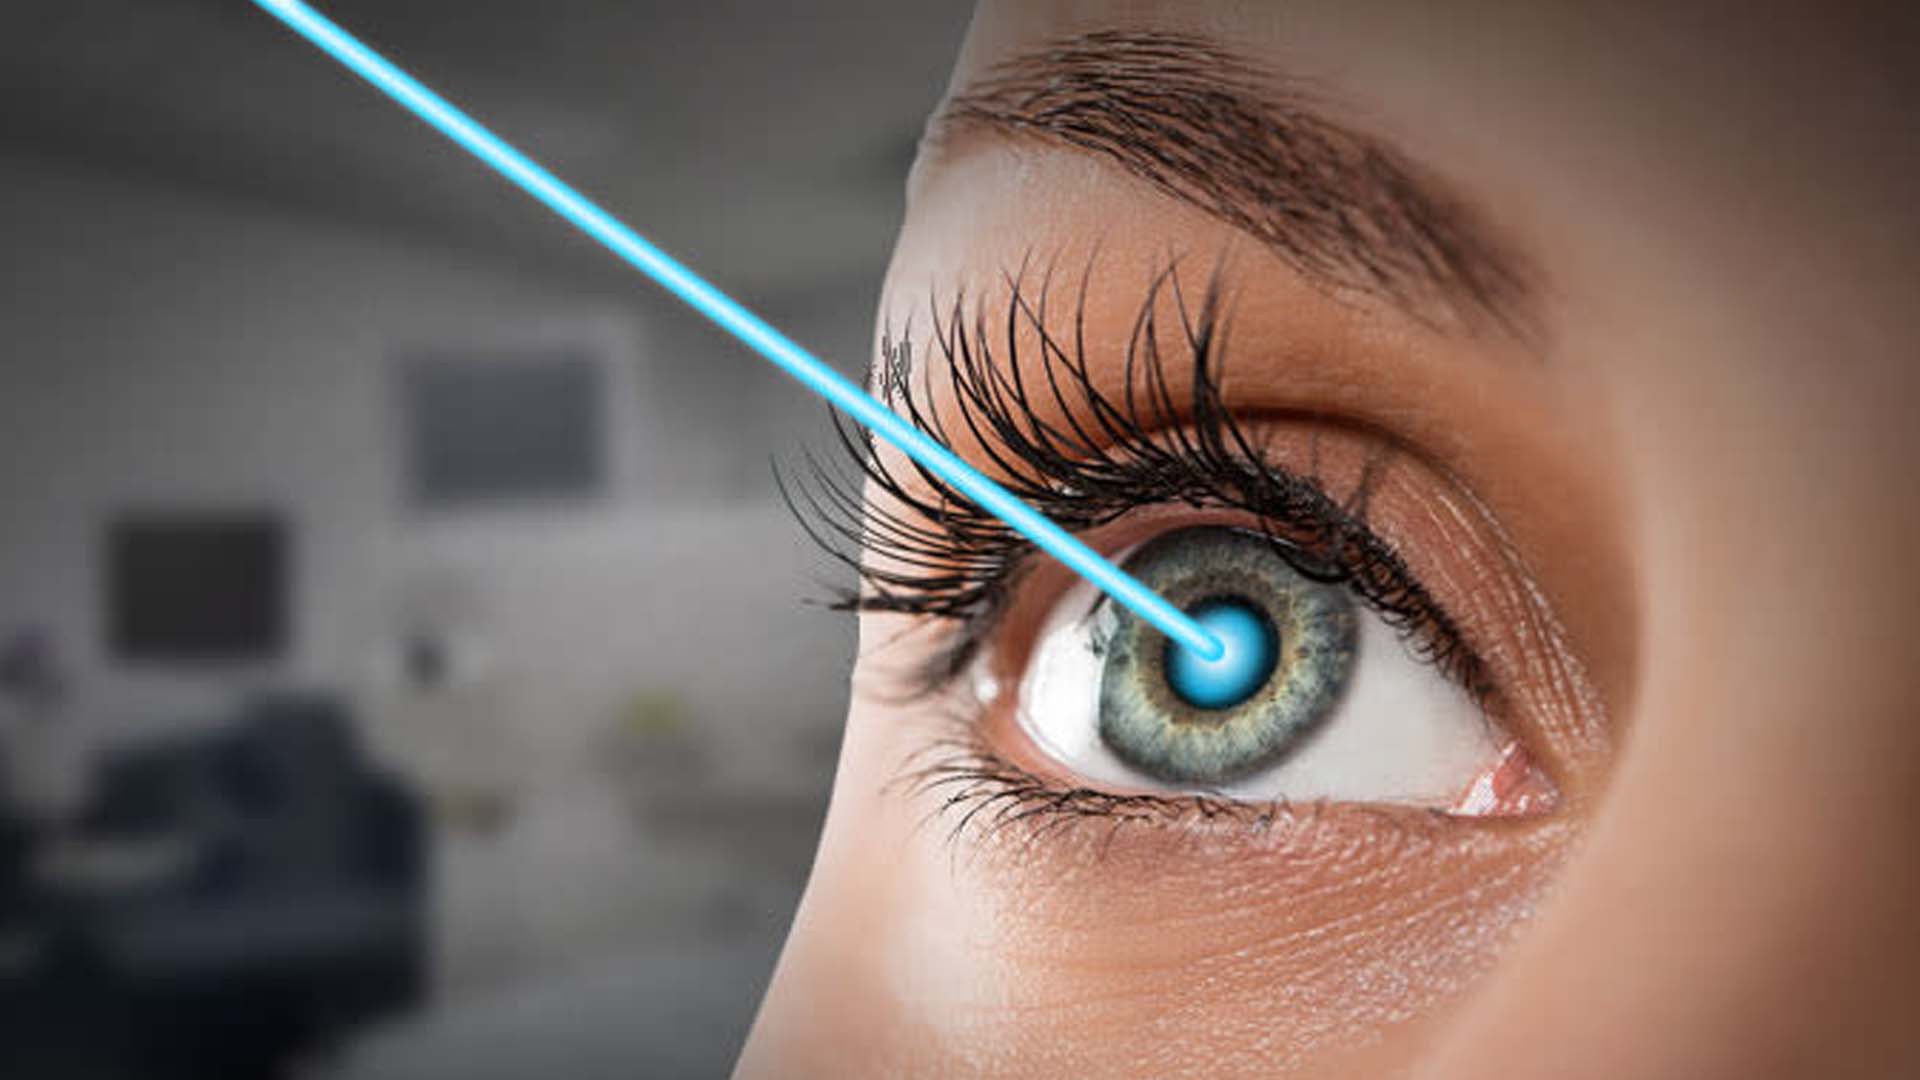 Read more about the article Things to consider before going for laser eye surgery